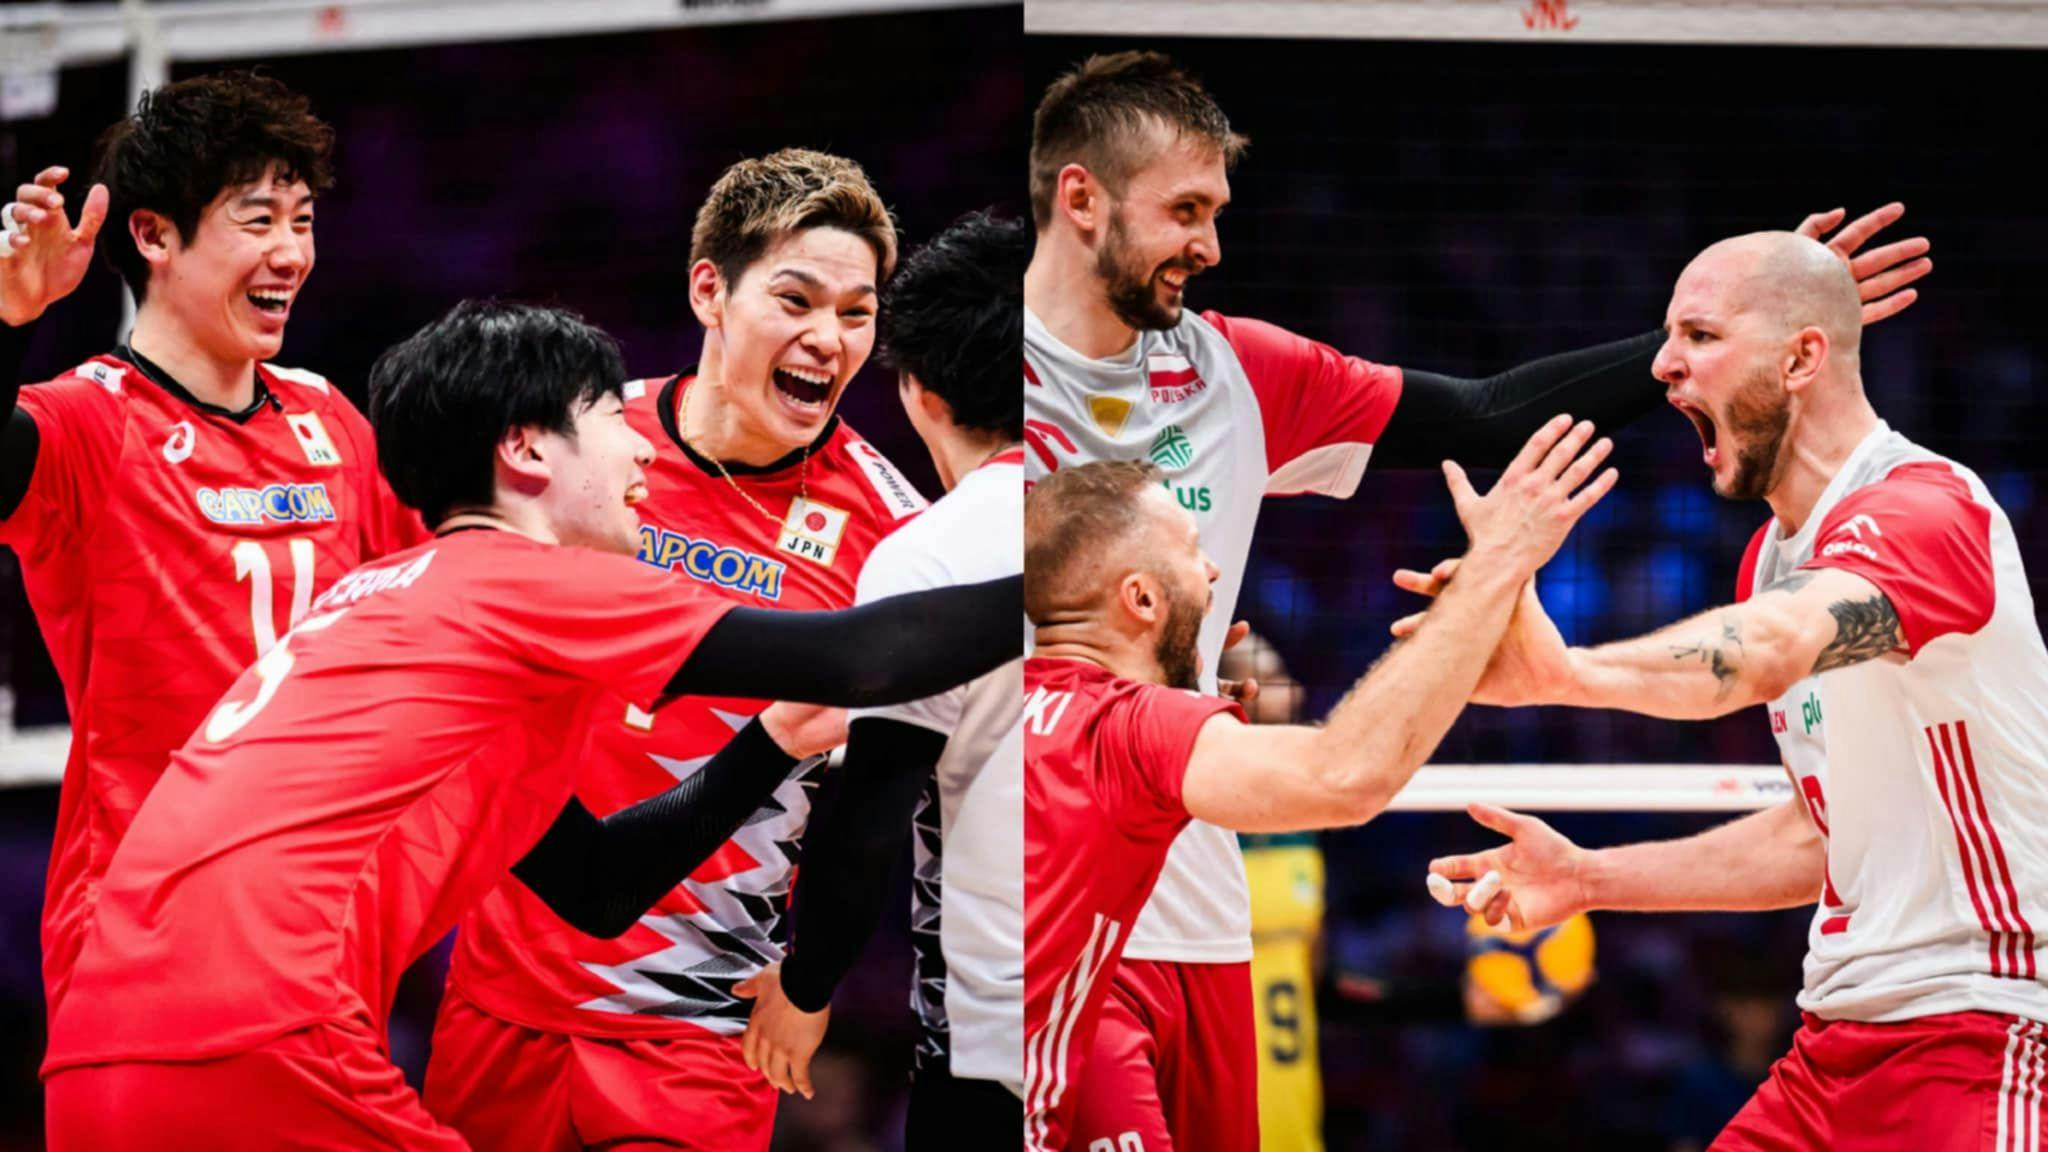 VNL: Japan, Poland secure semis berths, eliminate Canada, Brazil from title contention
